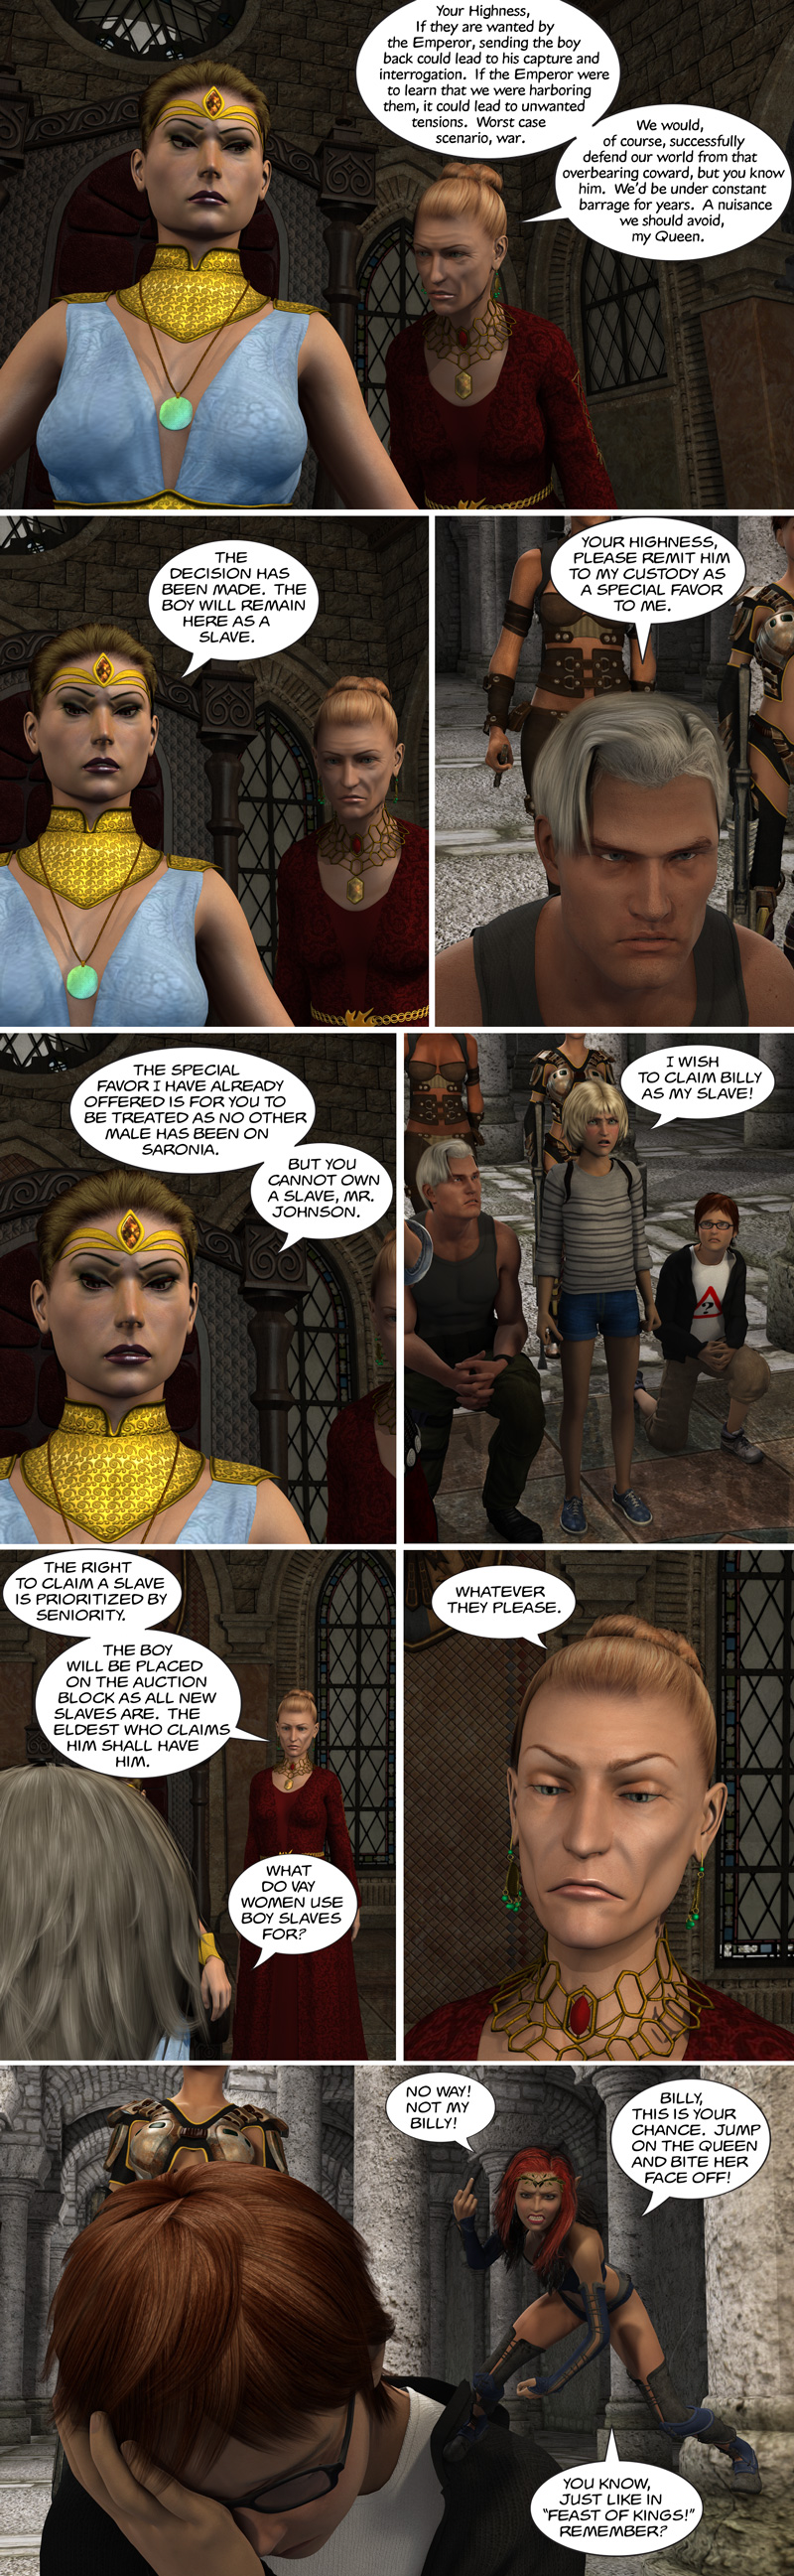 Chapter 12, page 16